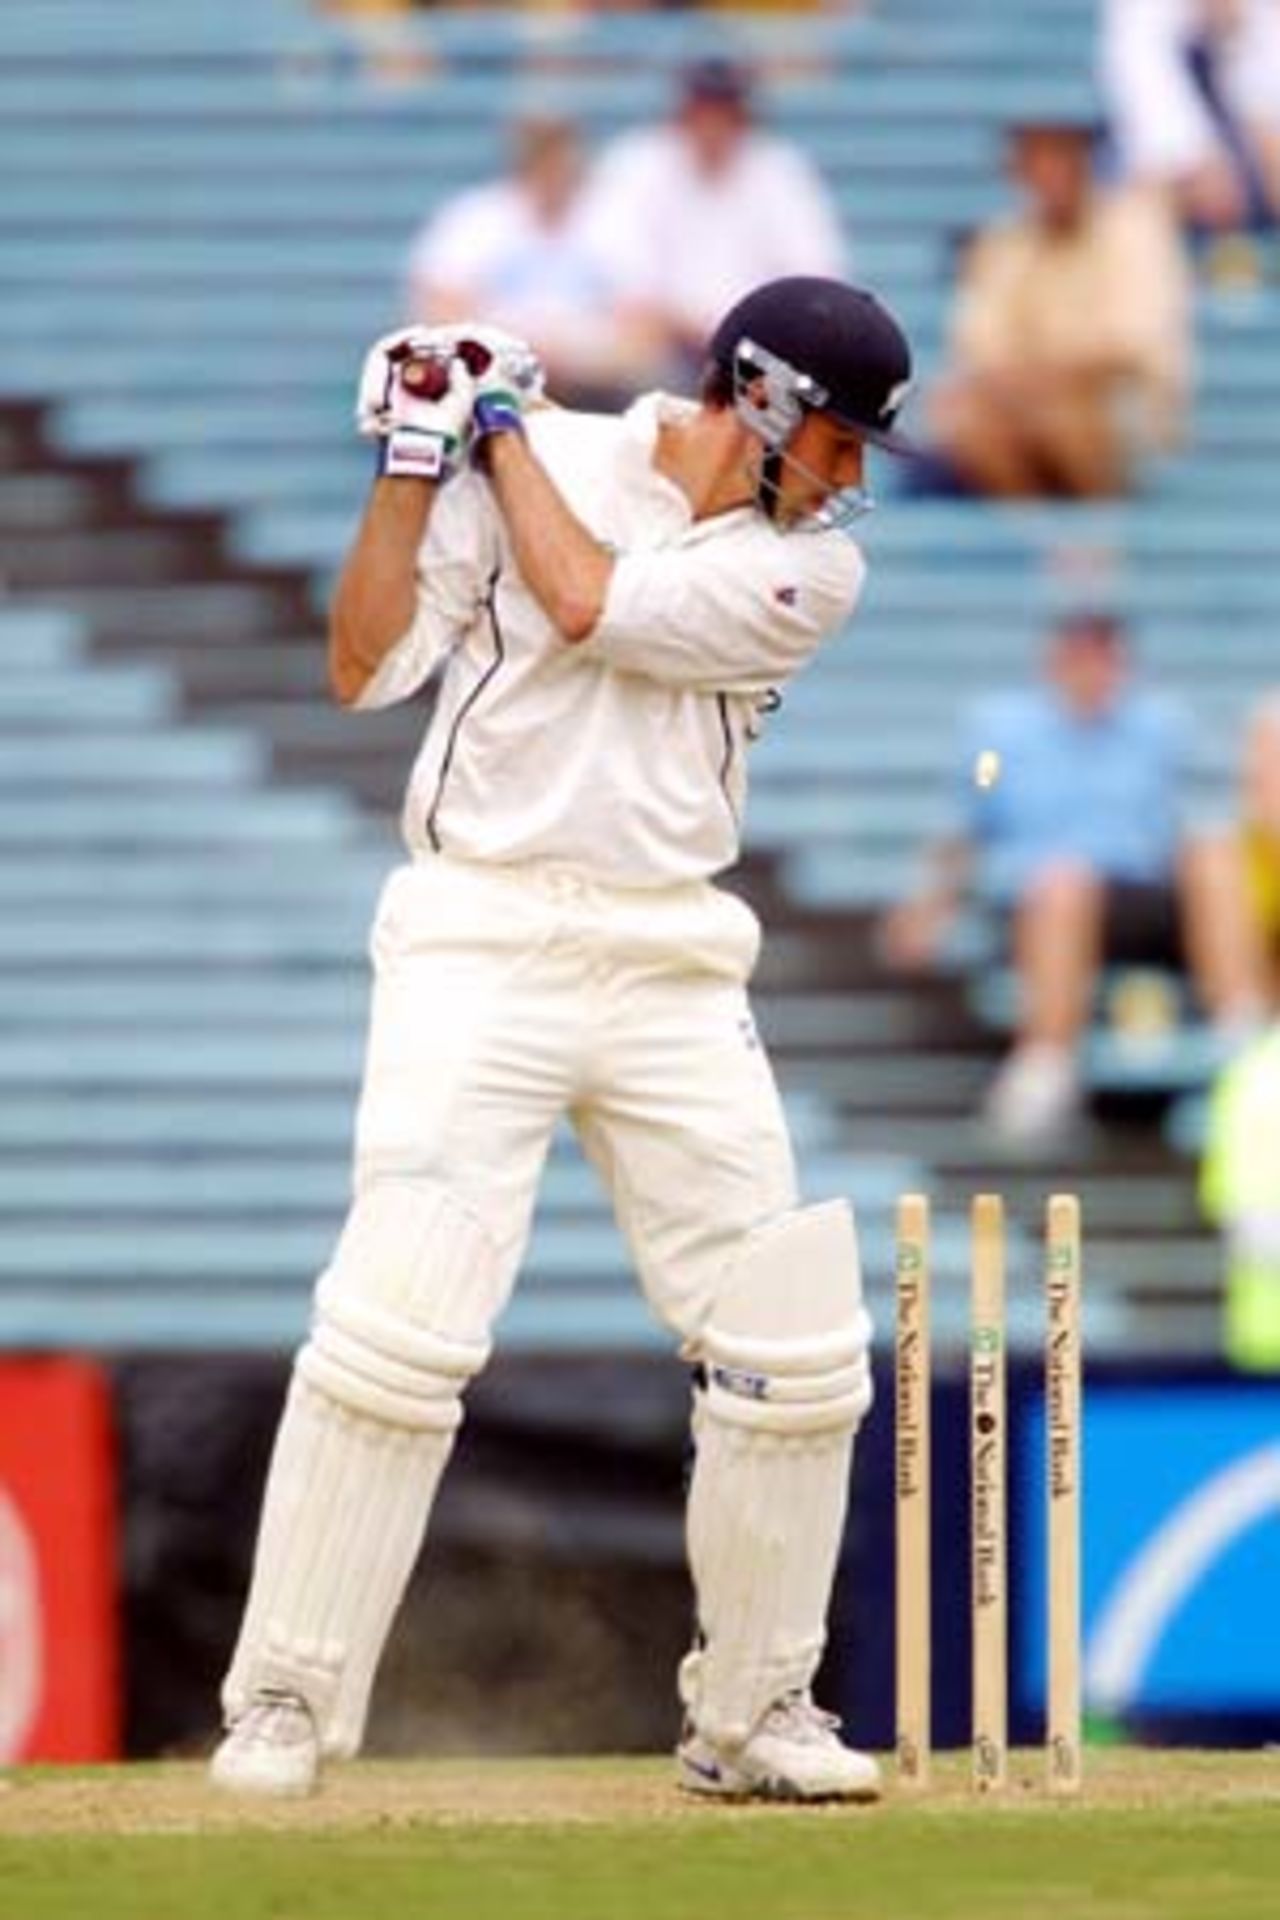 New Zealand batsman Stephen Fleming looks back after dragging an inside edge on to the stumps, to see he is bowled by Pakistan off spinner Saqlain Mushtaq for 86. 1st Test: New Zealand v Pakistan at Eden Park, Auckland, 8-12 March 2001 (10 March 2001).